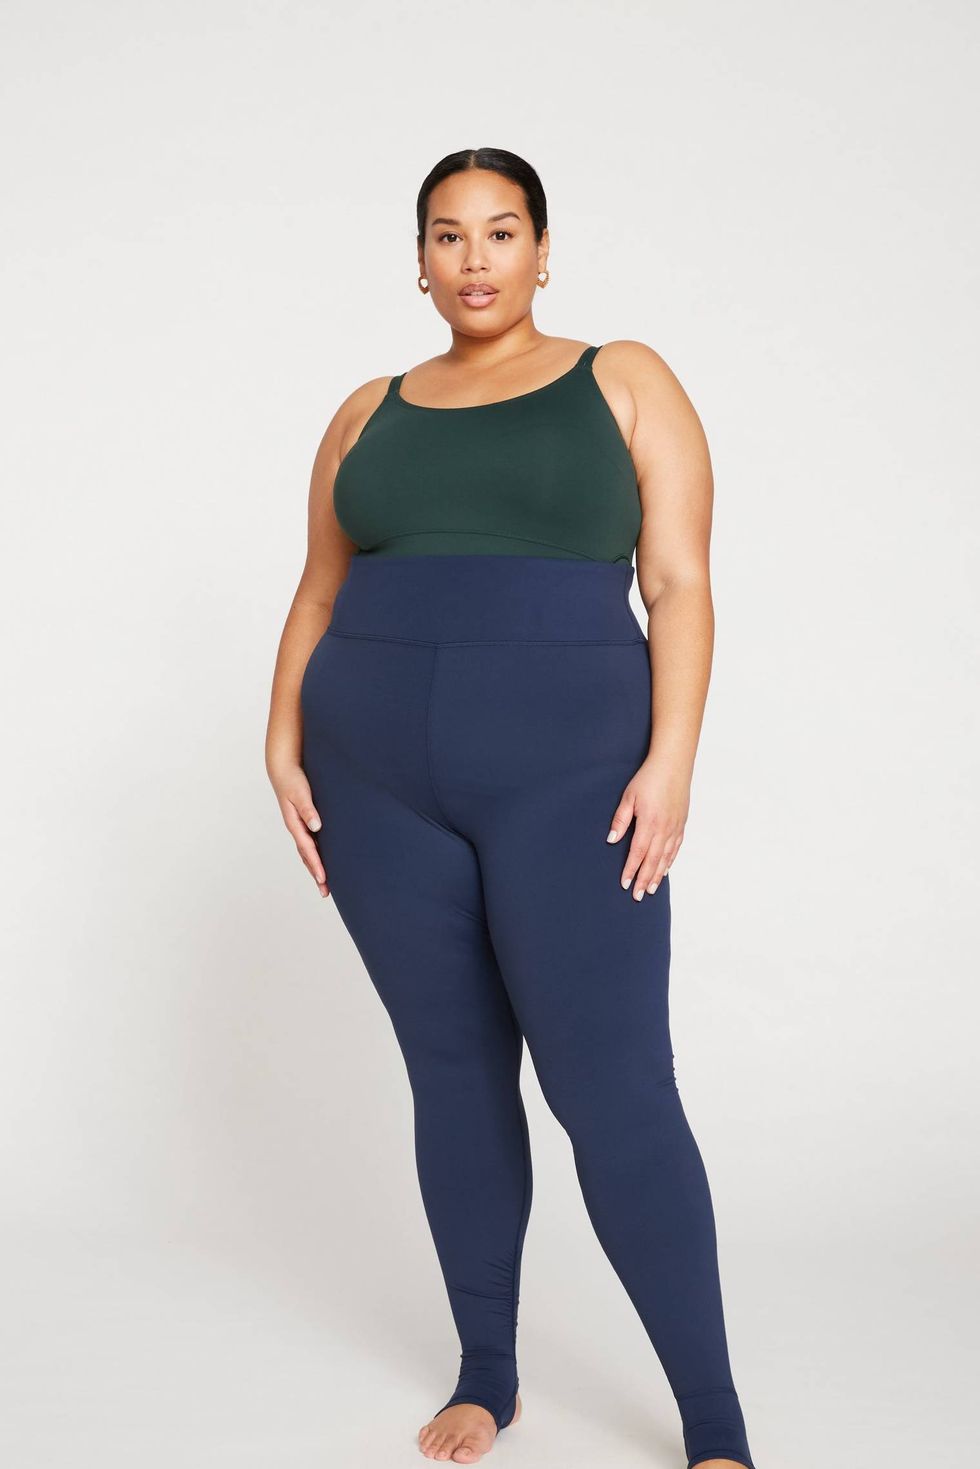 The Best Plus-Size Leggings Are Cheap by Daisity 2017